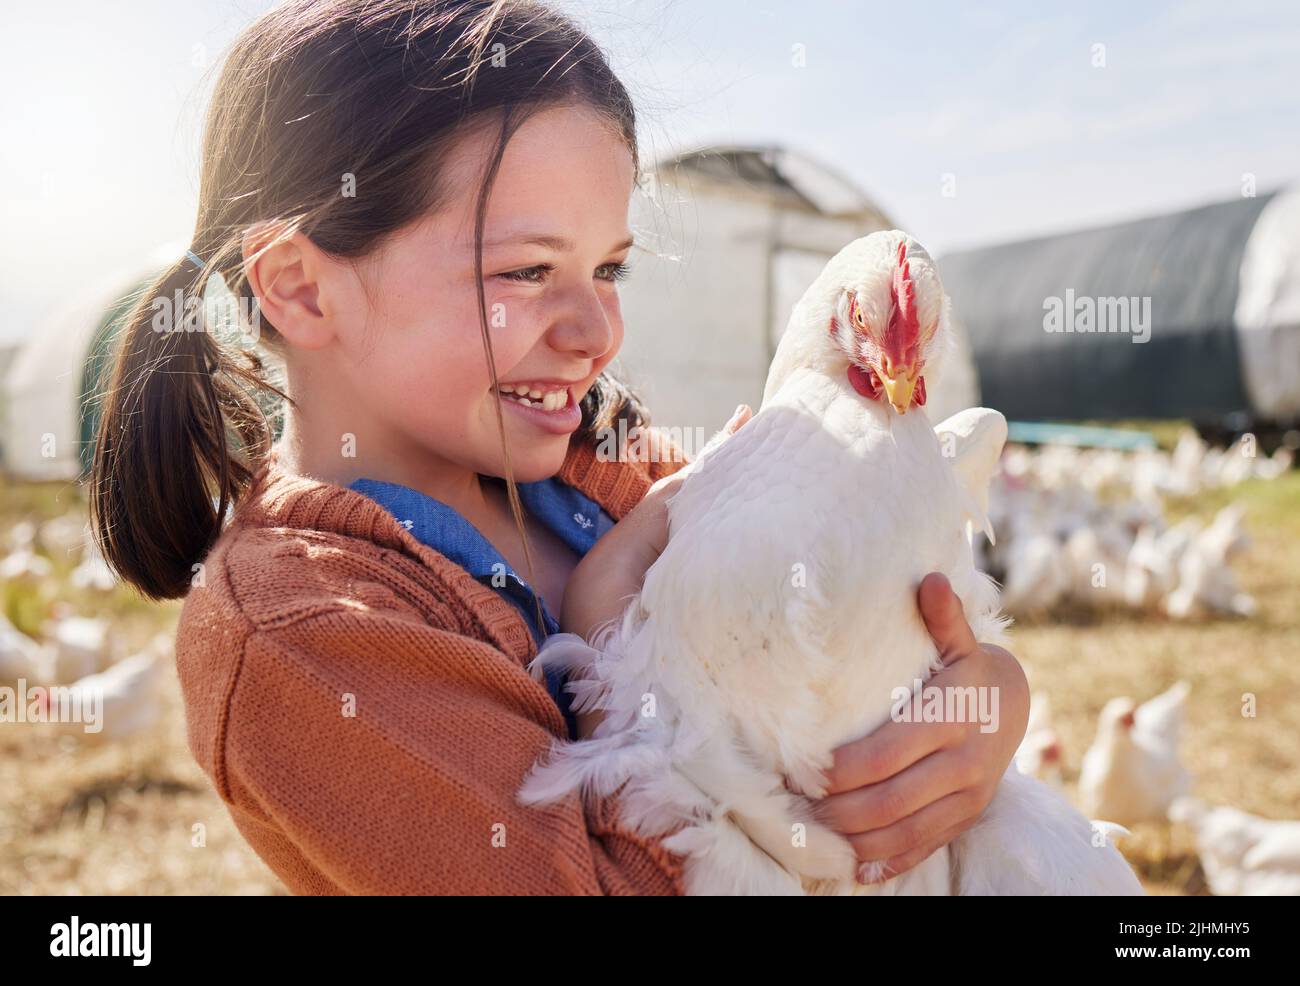 Farming teaches kids how to care for animals. an adorable little girl holding a chicken on a farm. Stock Photo